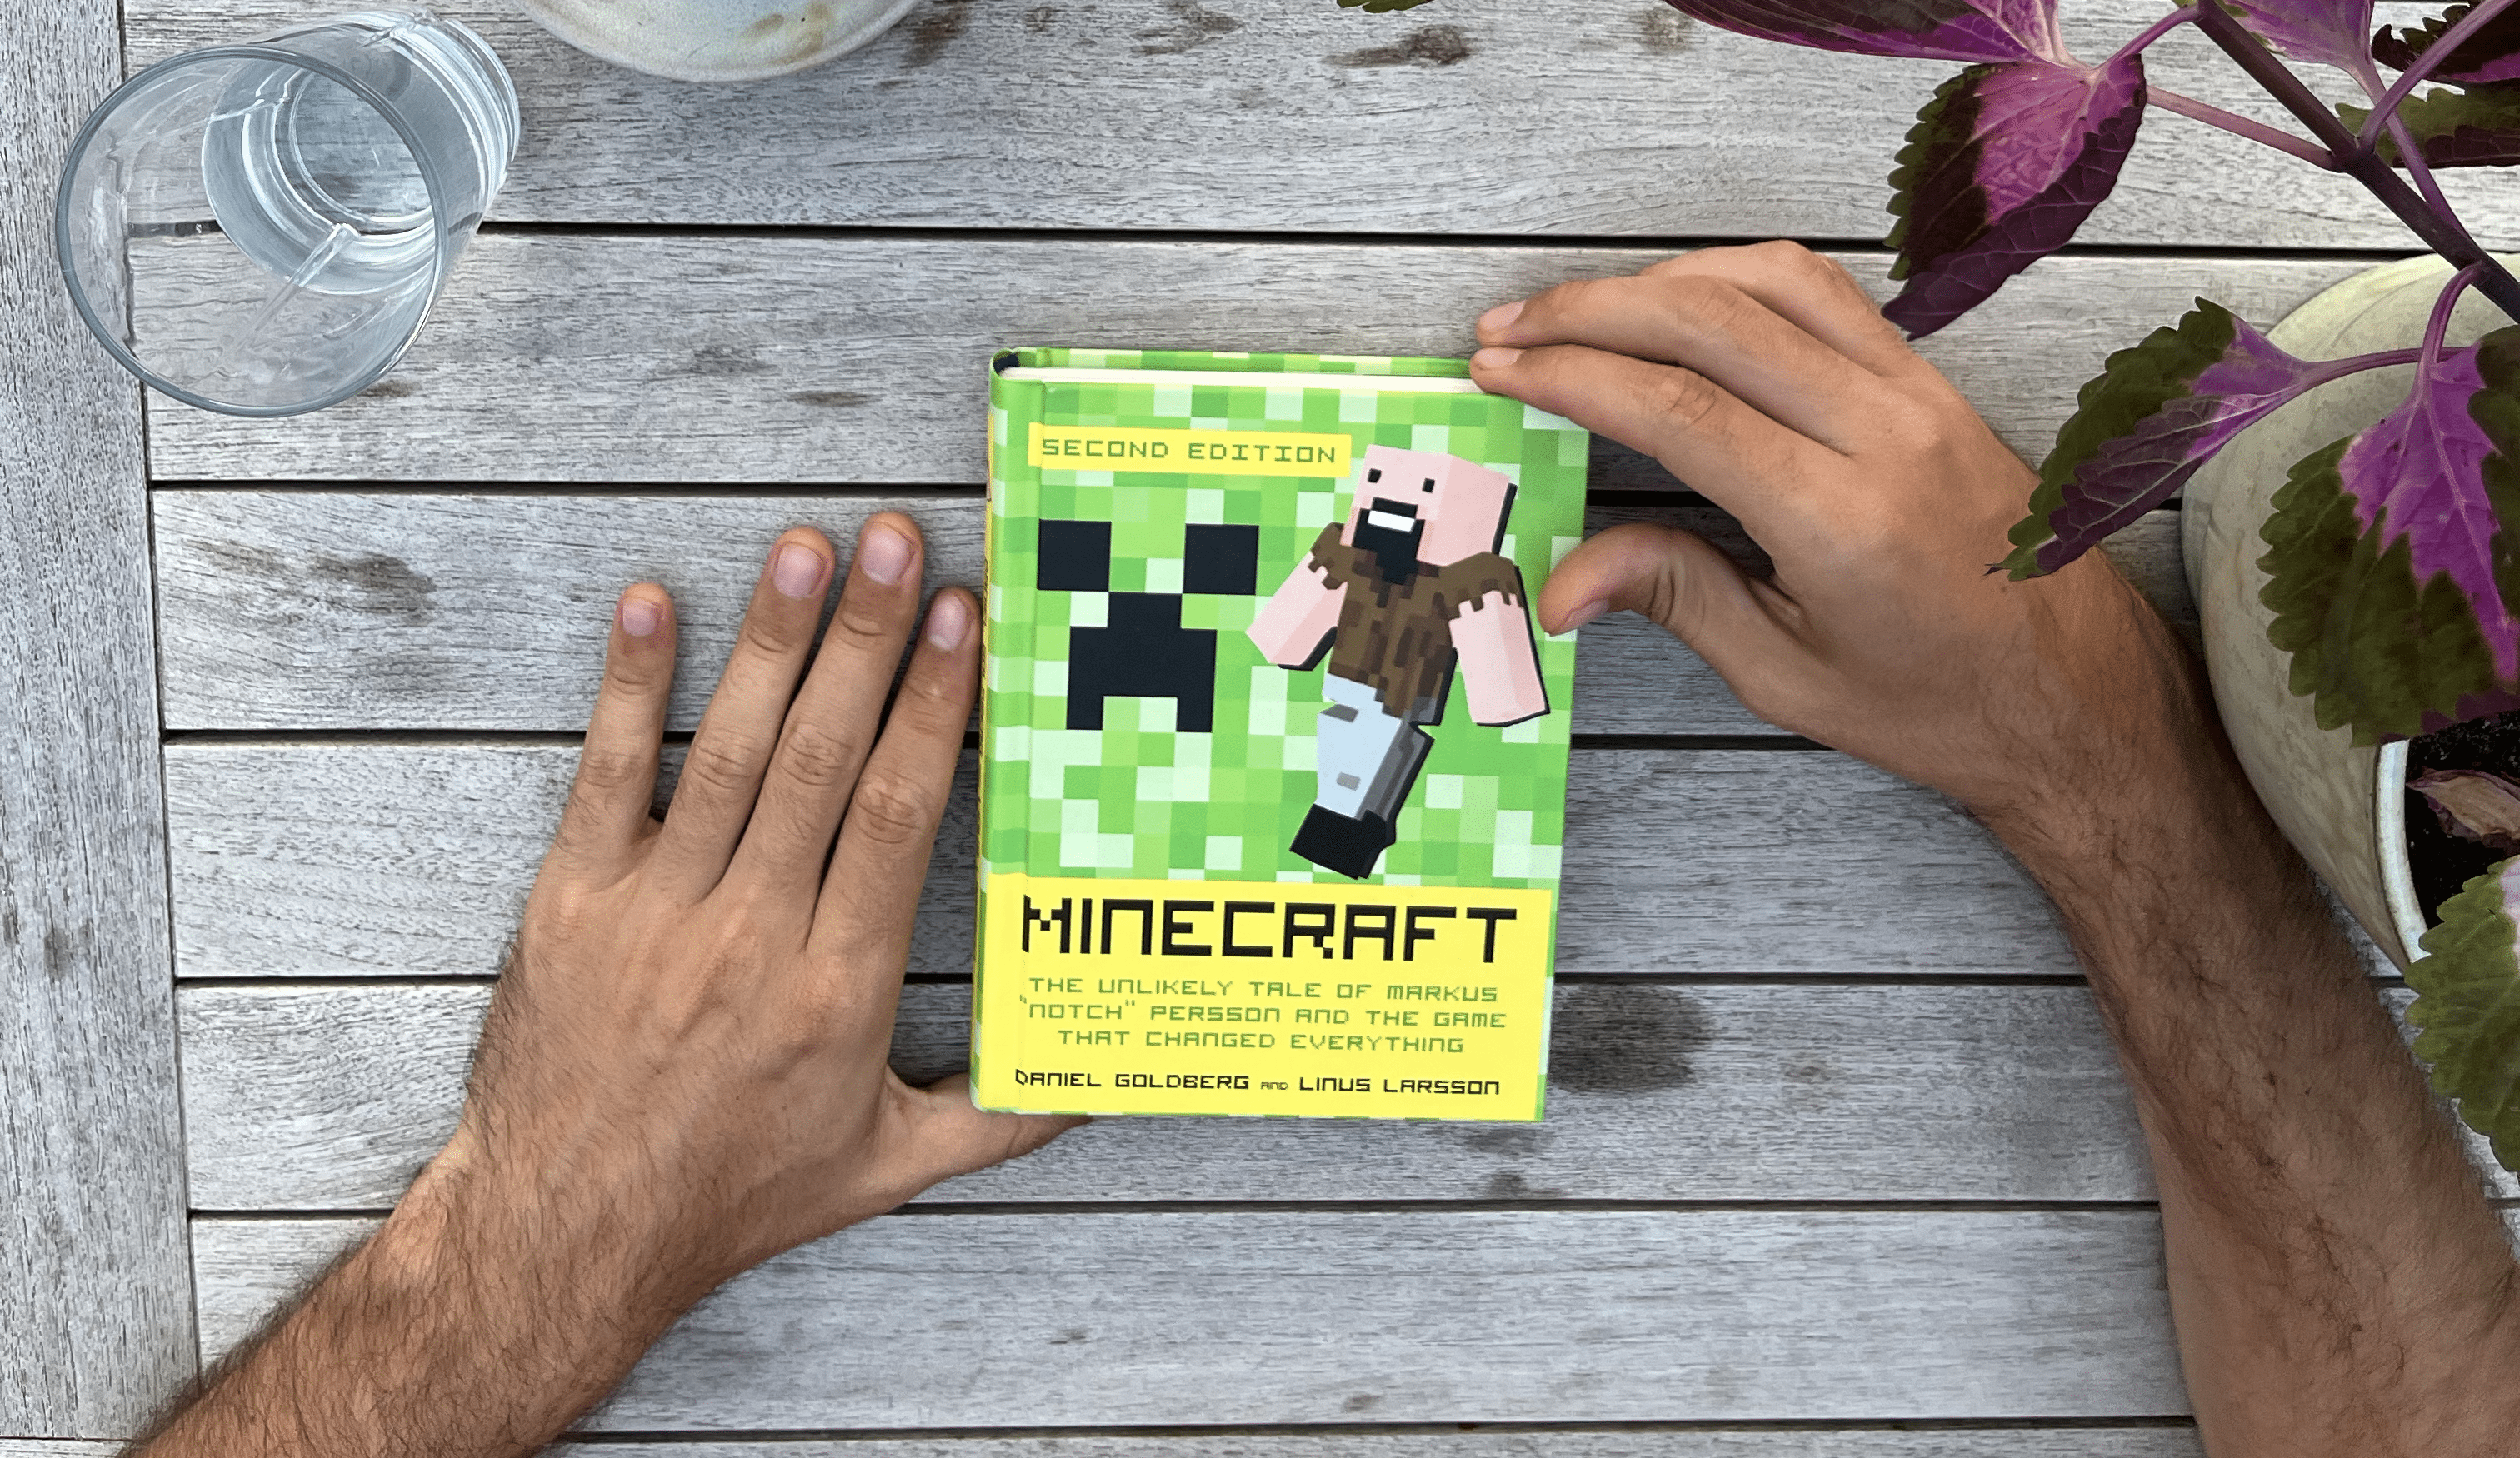 Summary: Minecraft: The Unlikely Tale of Markus “Notch” Persson and the Game That Changed Everything